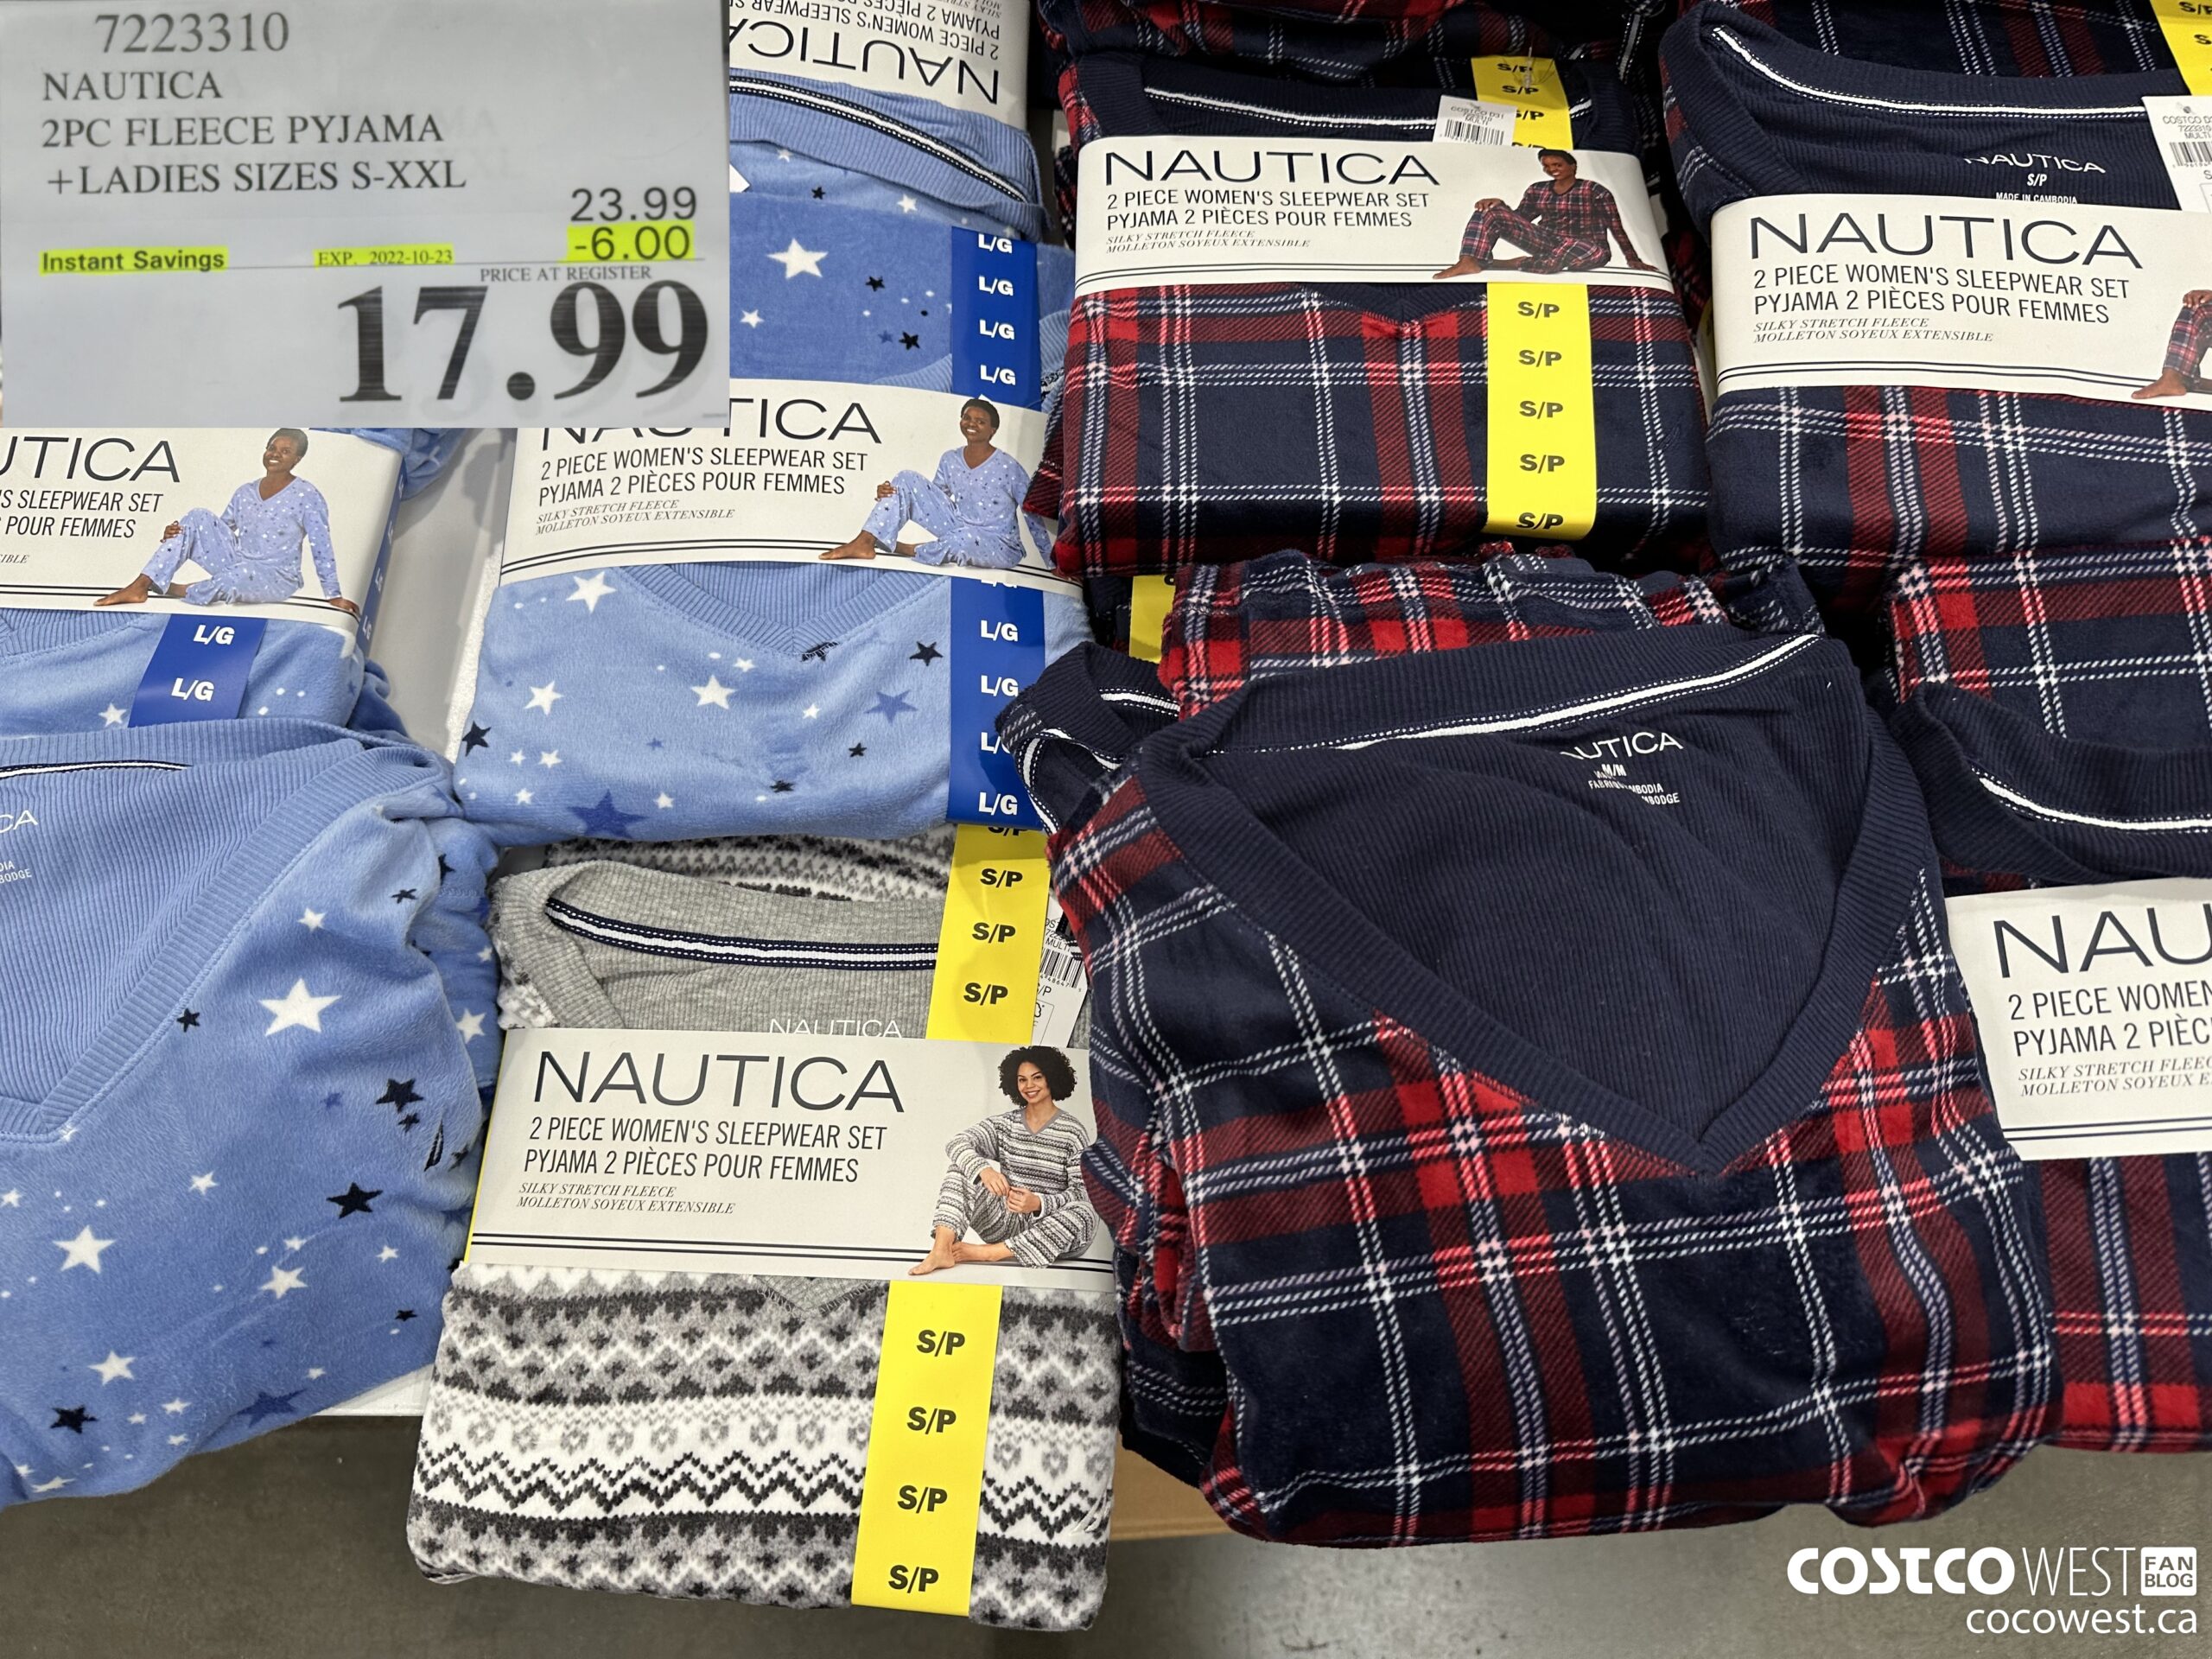 Costco Fall Superpost – The Entire Clothing Section! Costco Fan Blog